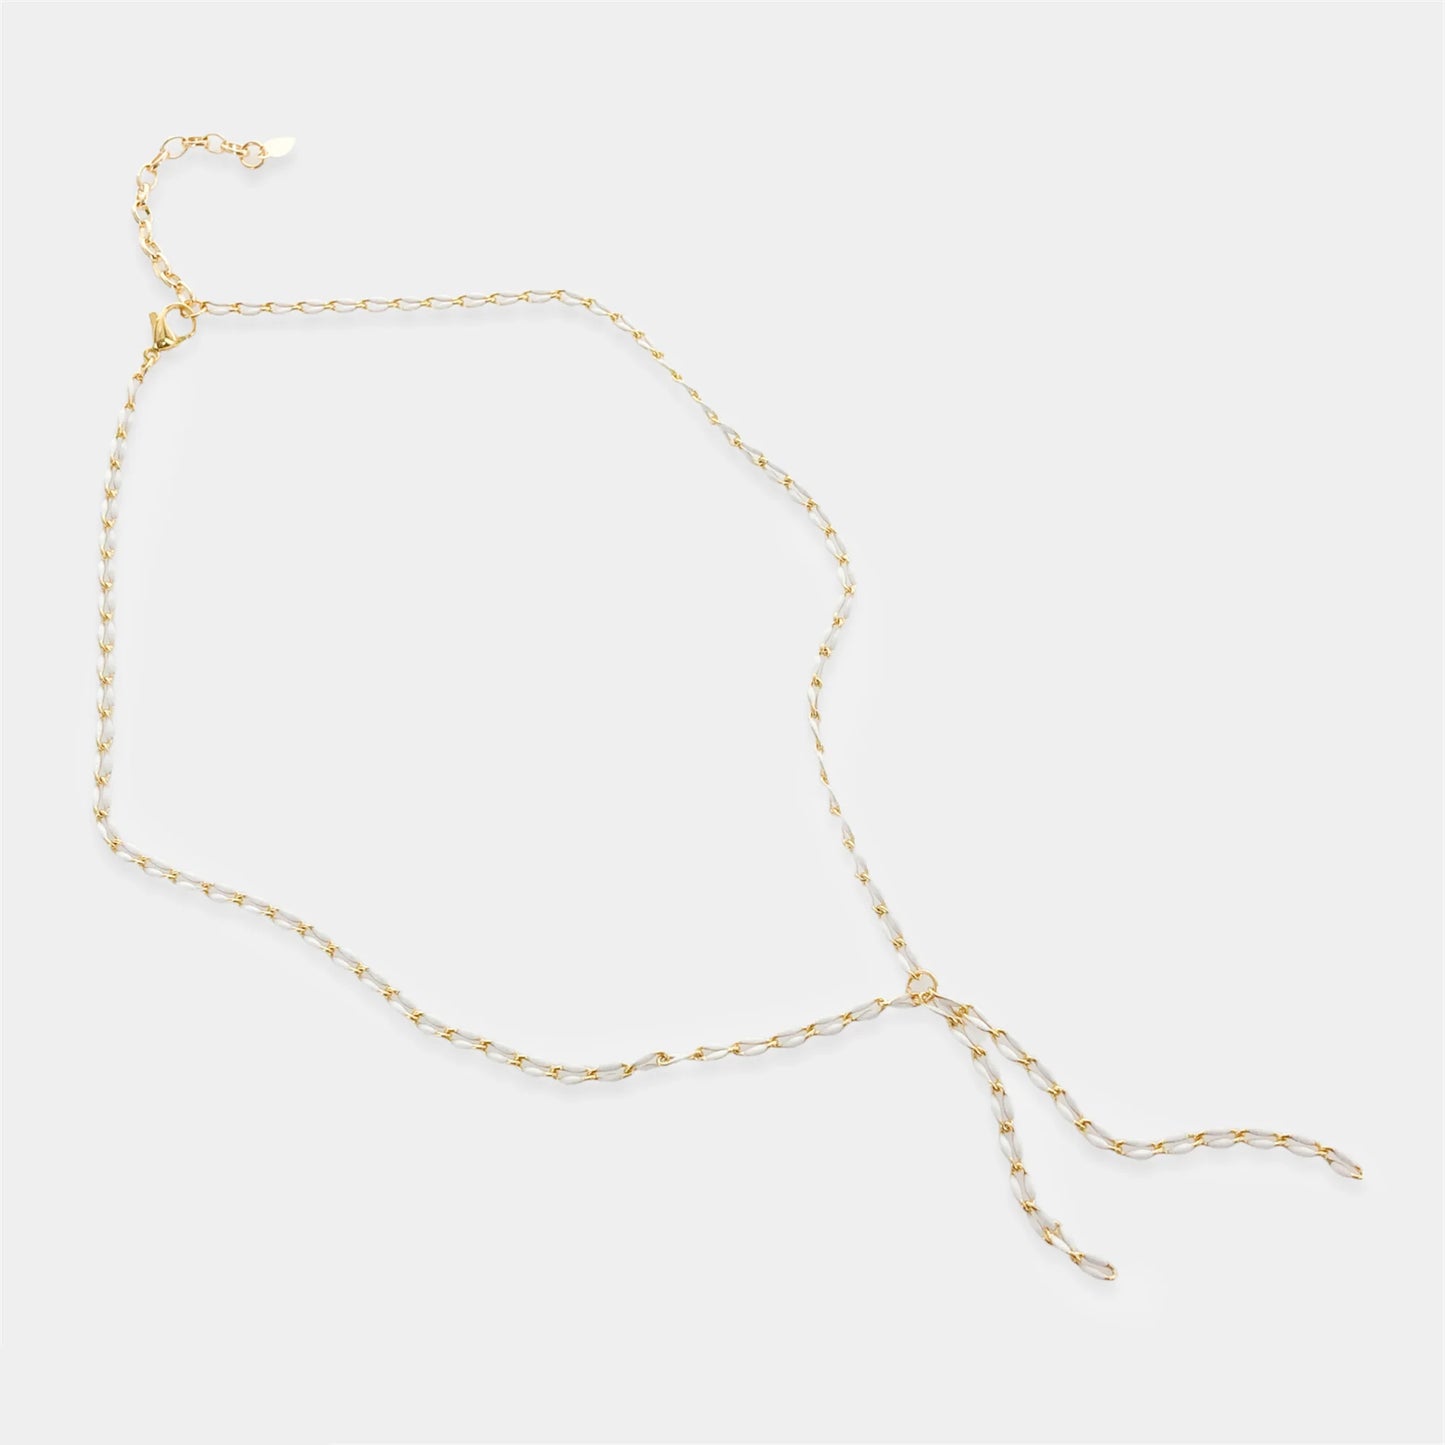 Tiny Chain Necklace w/ Tassles